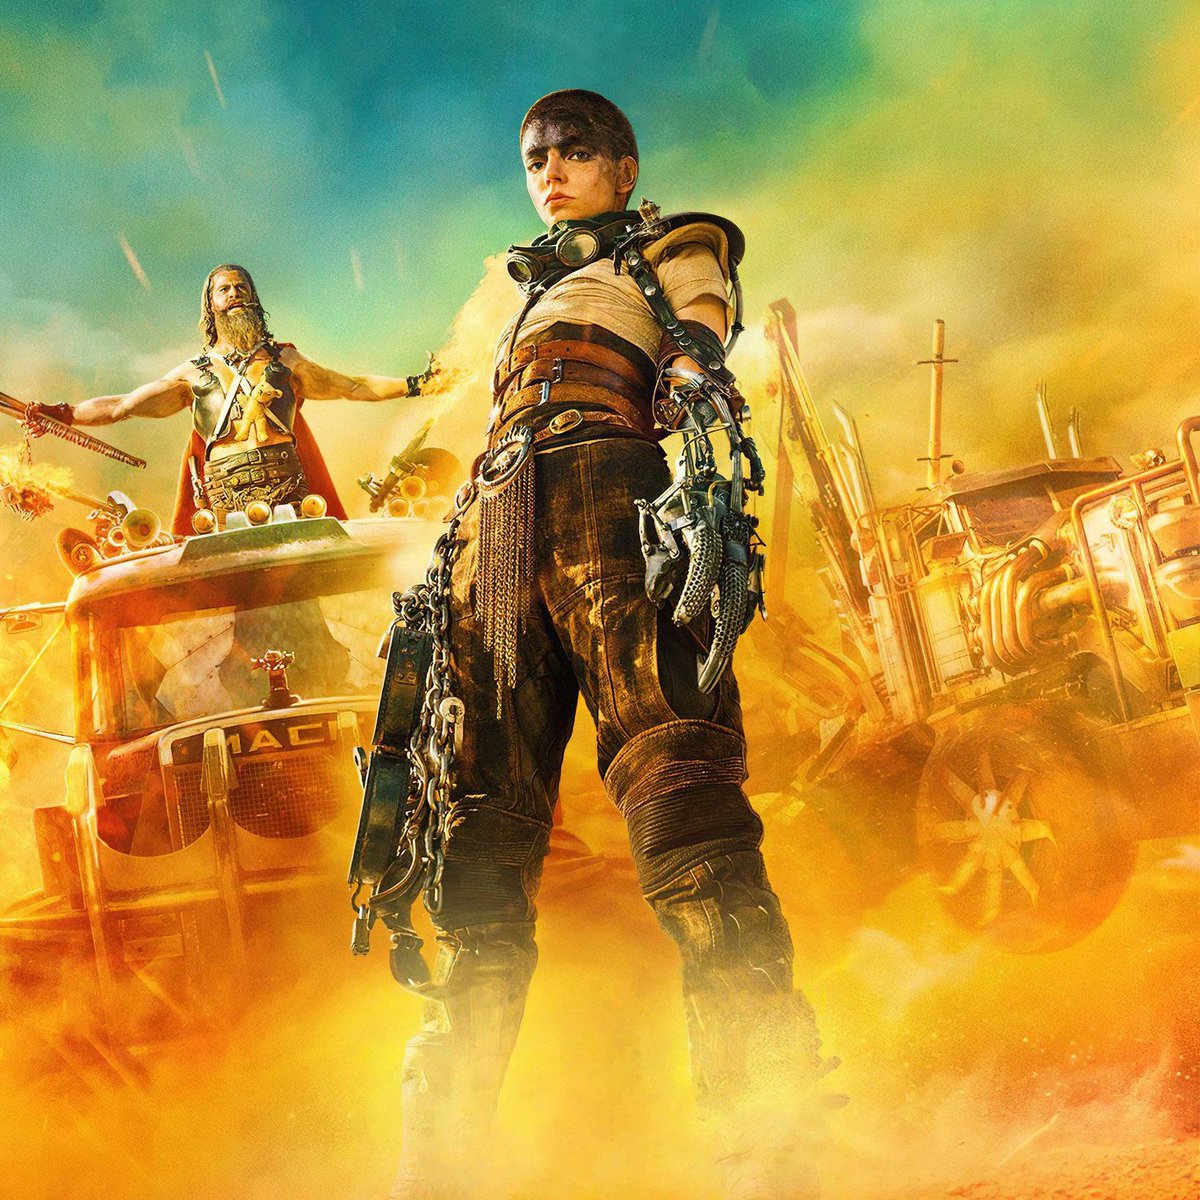 'FURIOSA' is tracking to earn $80M-$85M for its worldwide box office opening weekend The film had a budget of $168M